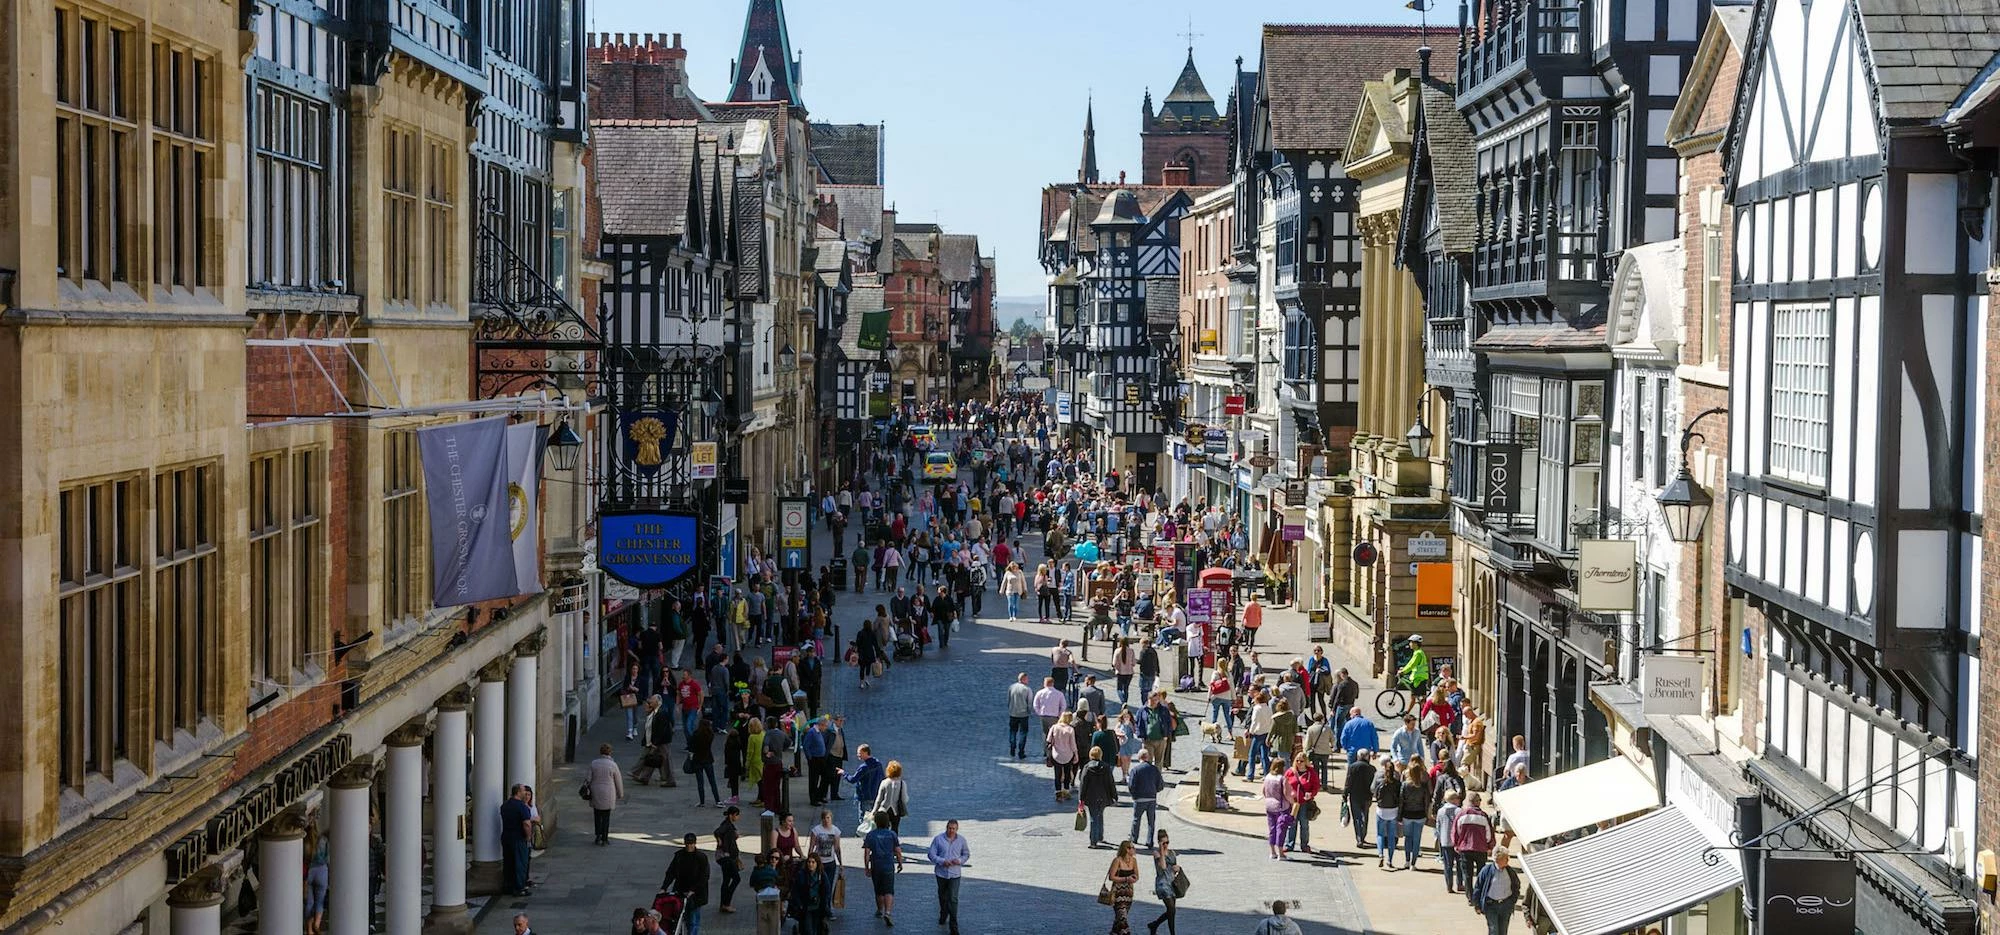 Chester city centre saw a 13 per cent rise in year-on-year footfall during July with more than 1.8 m